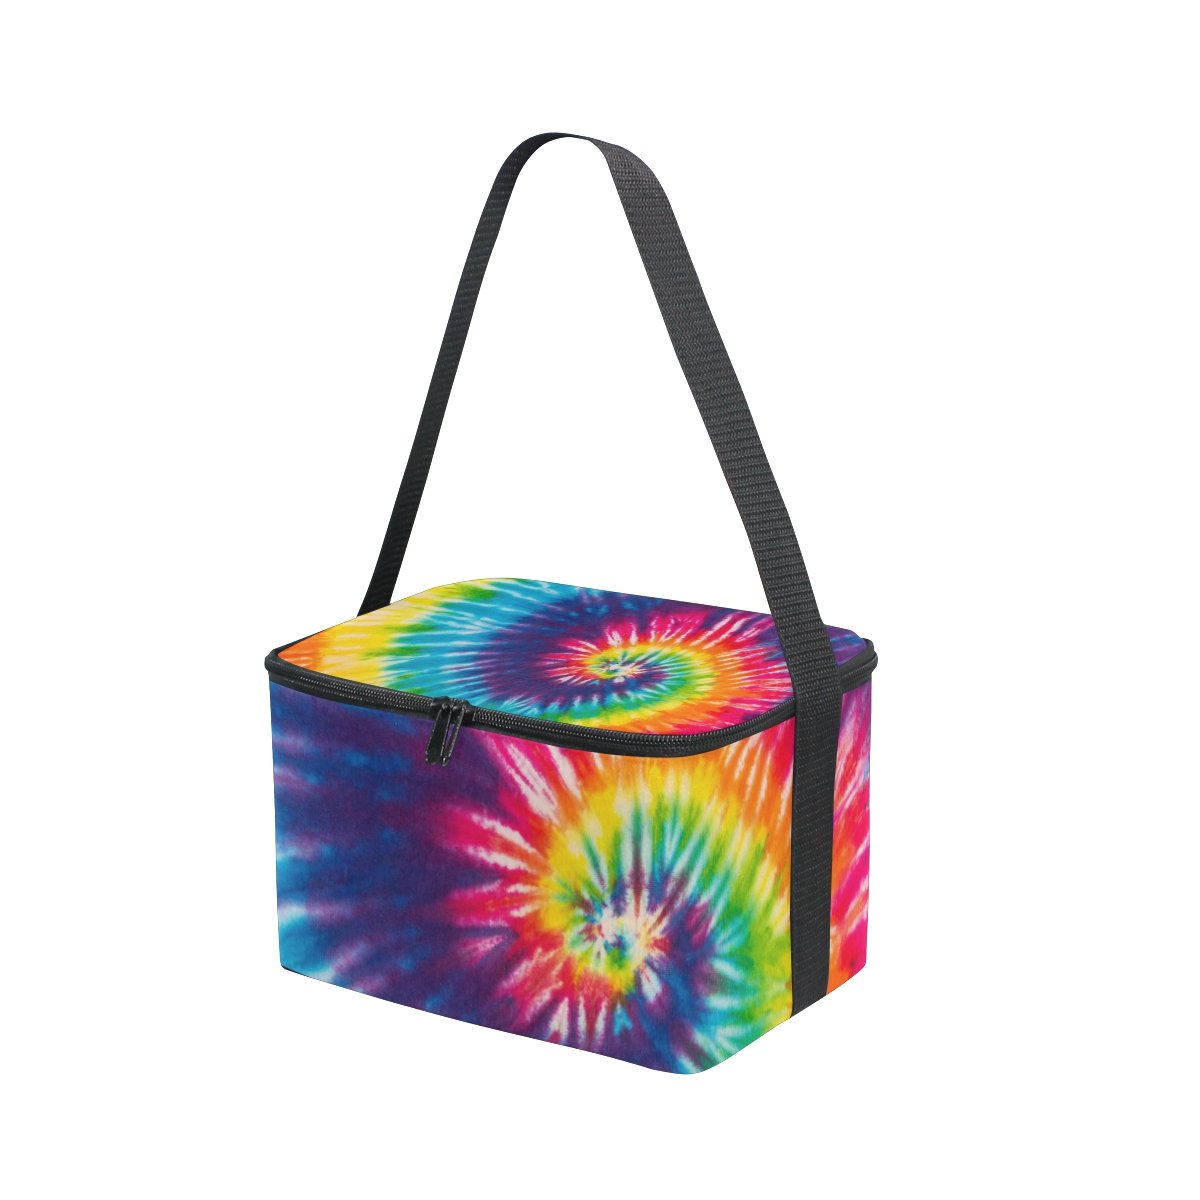 Use4 Swirl Tie Dye Colorful Insulated Lunch Bag Tote Bag Cooler Lunchbox for Picnic School Women Men Kids